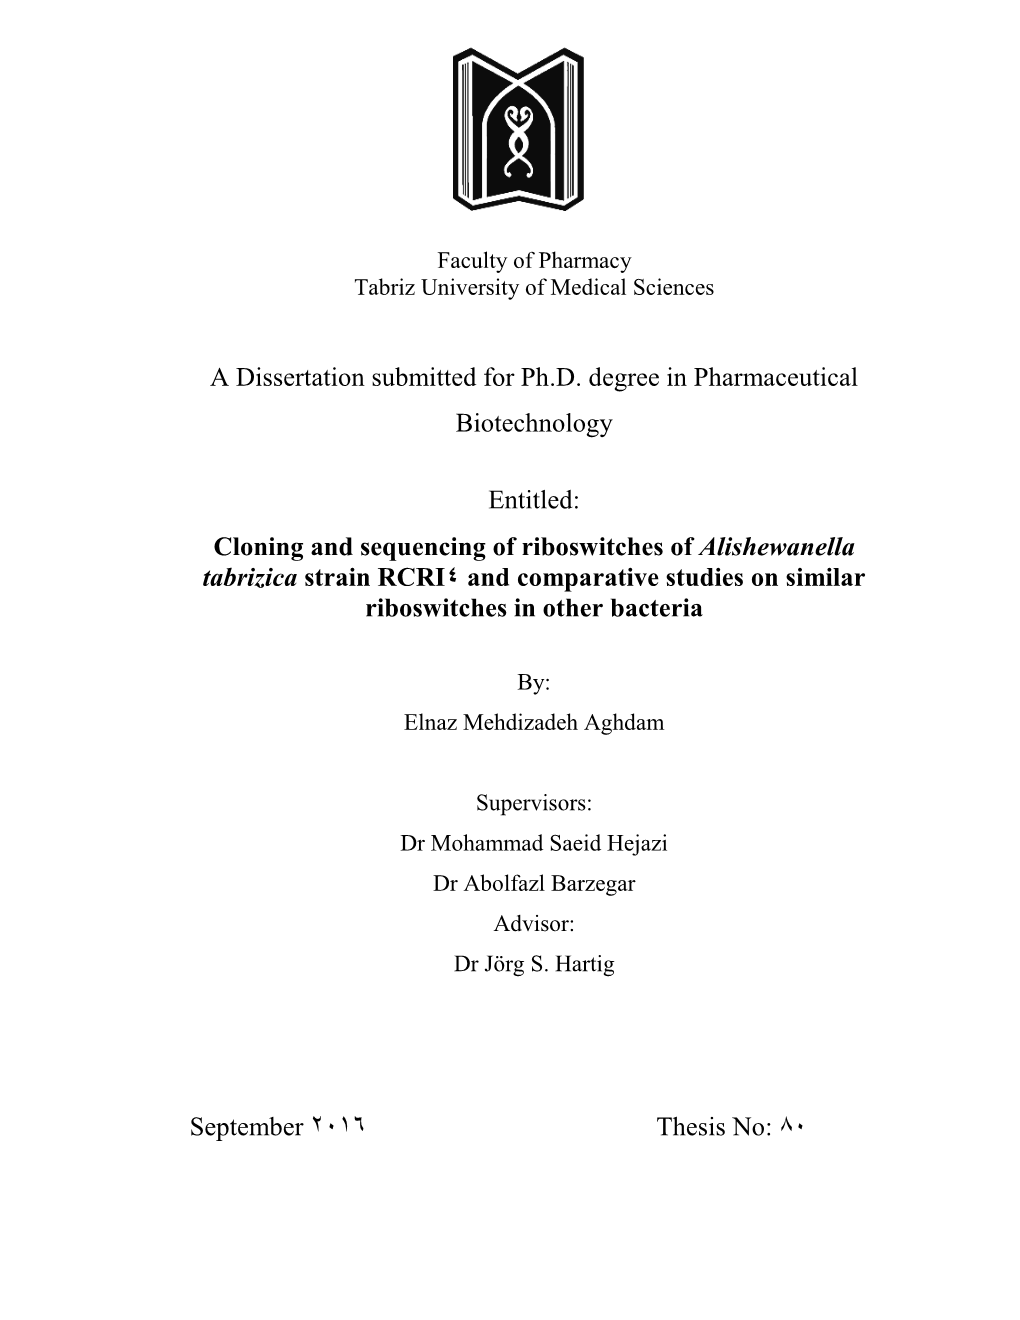 A Dissertation Submitted for Ph.D. Degree in Pharmaceutical Biotechnology